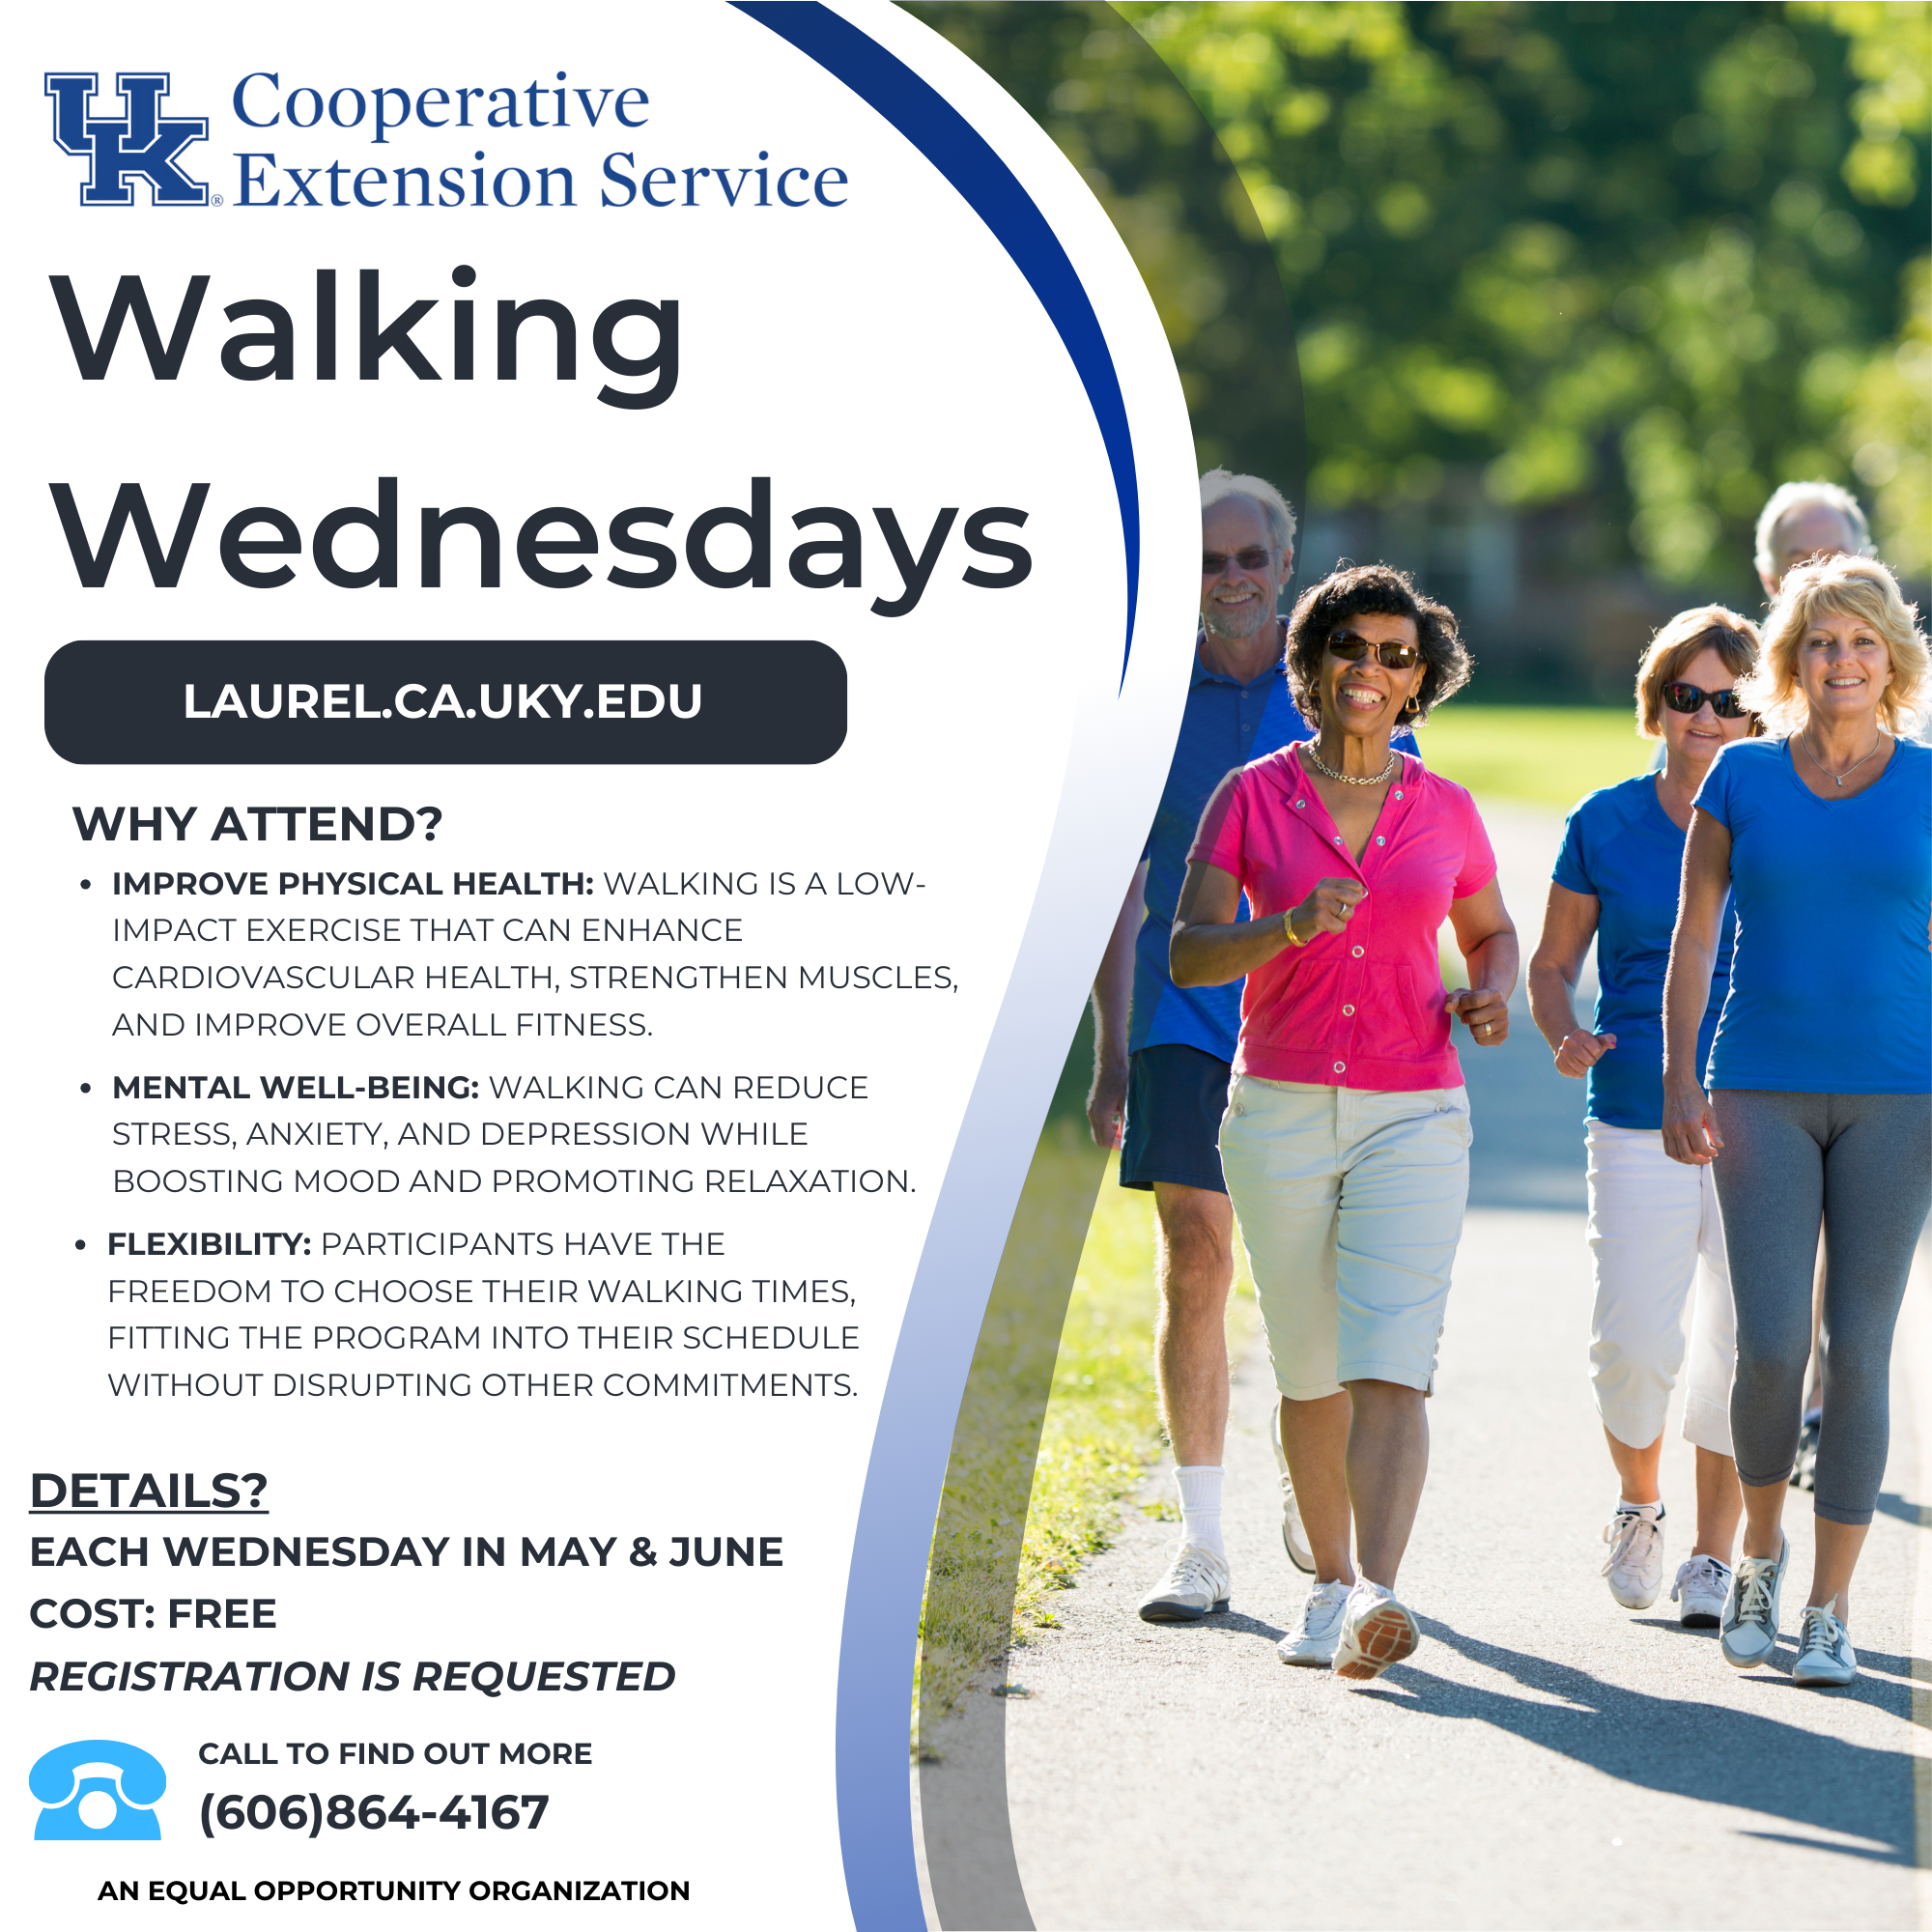 Flyer with background of older people walking on a sidewalk and includes class date details.